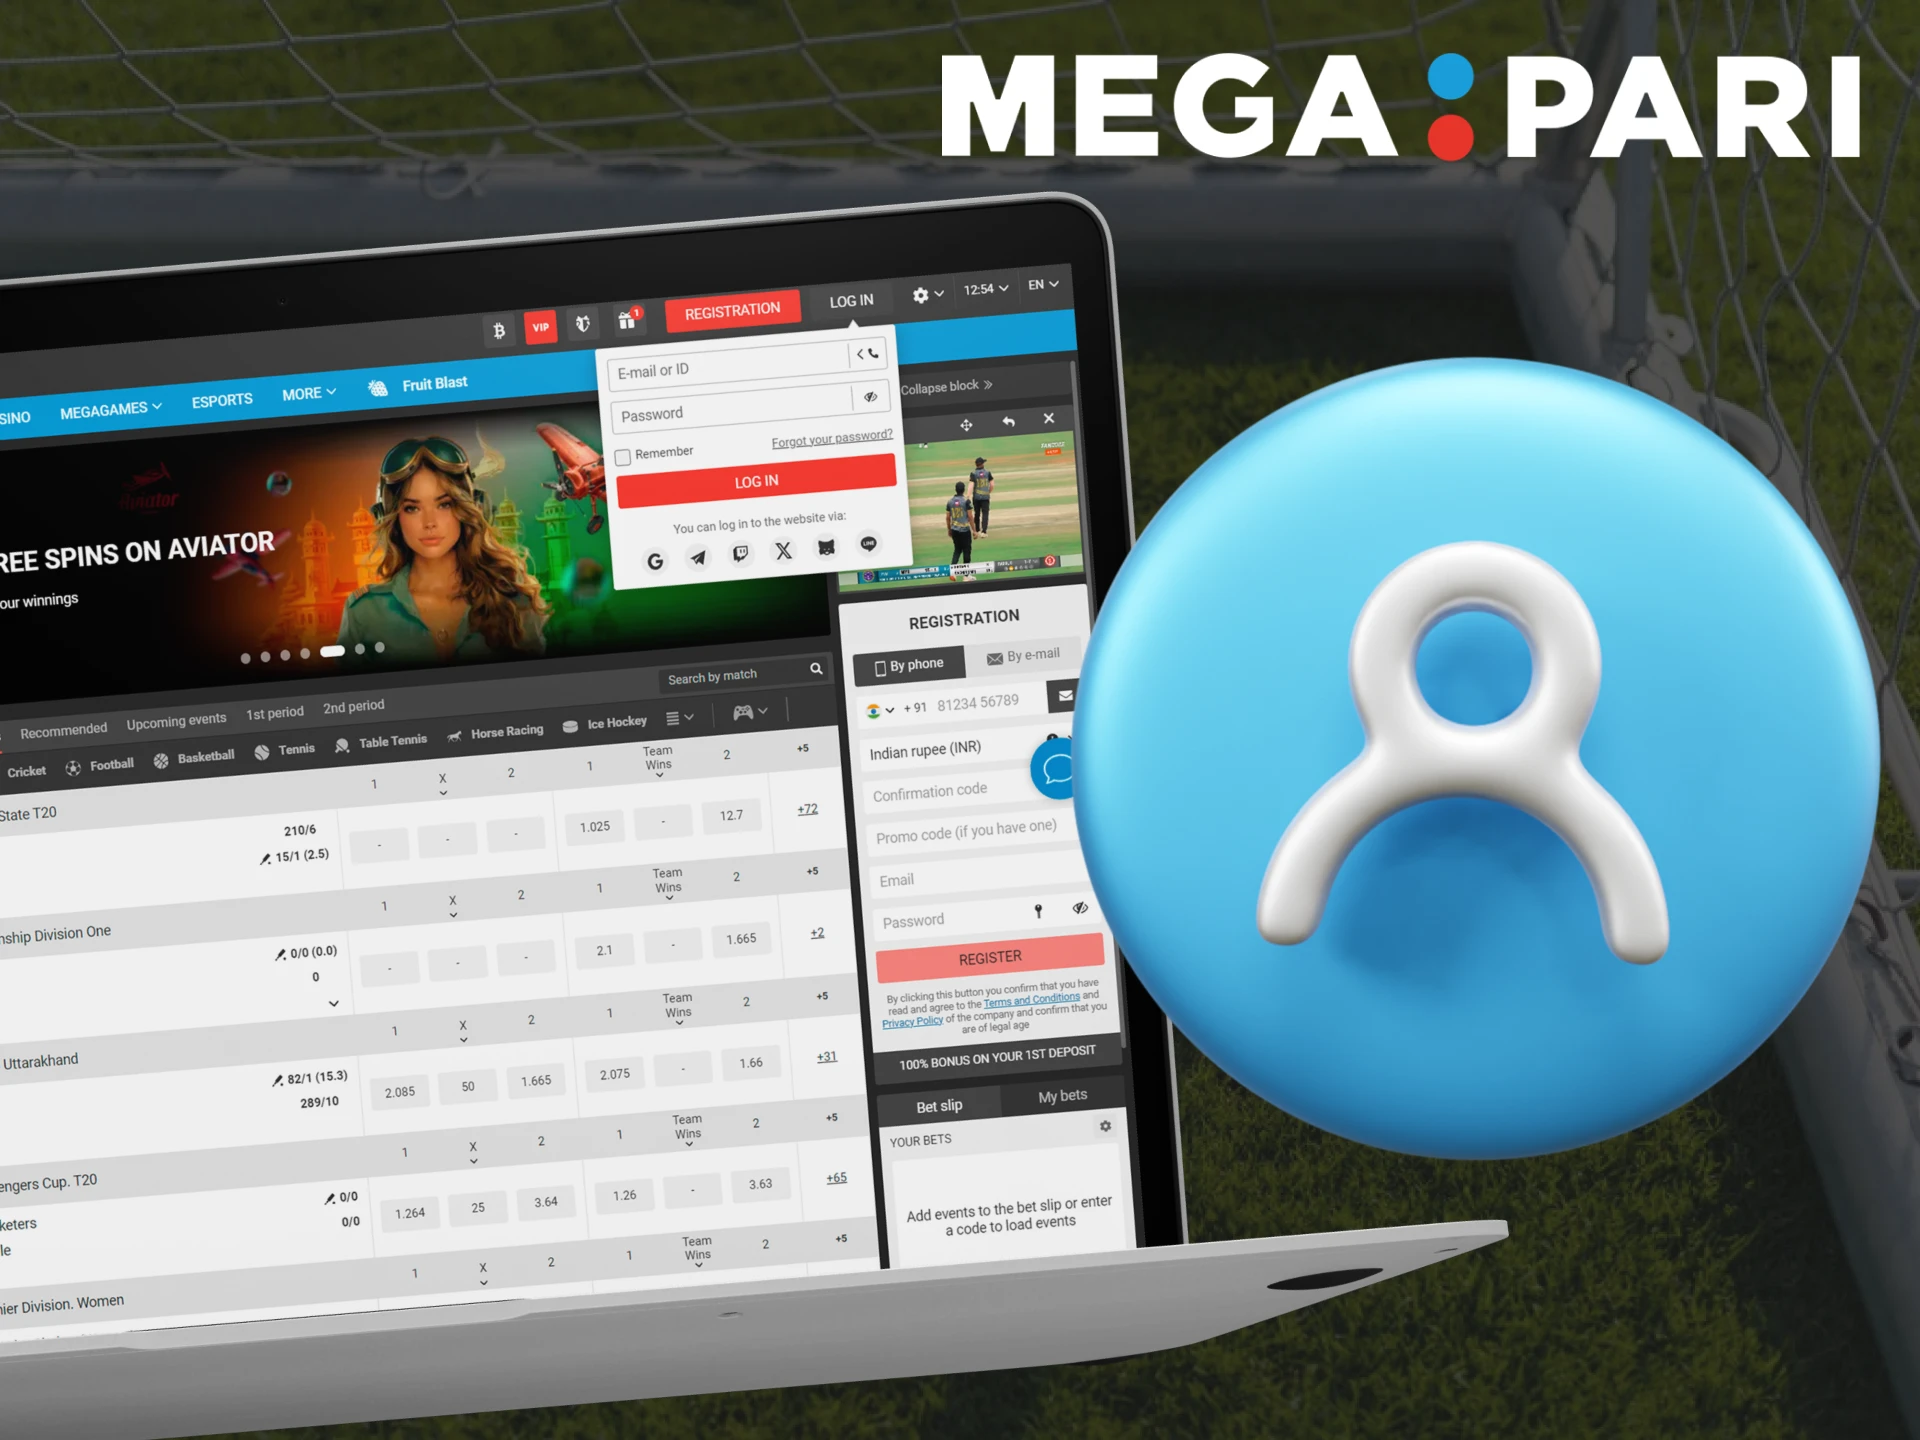 To start placing bets and playing at Megapari Casino, you need to log into your account.